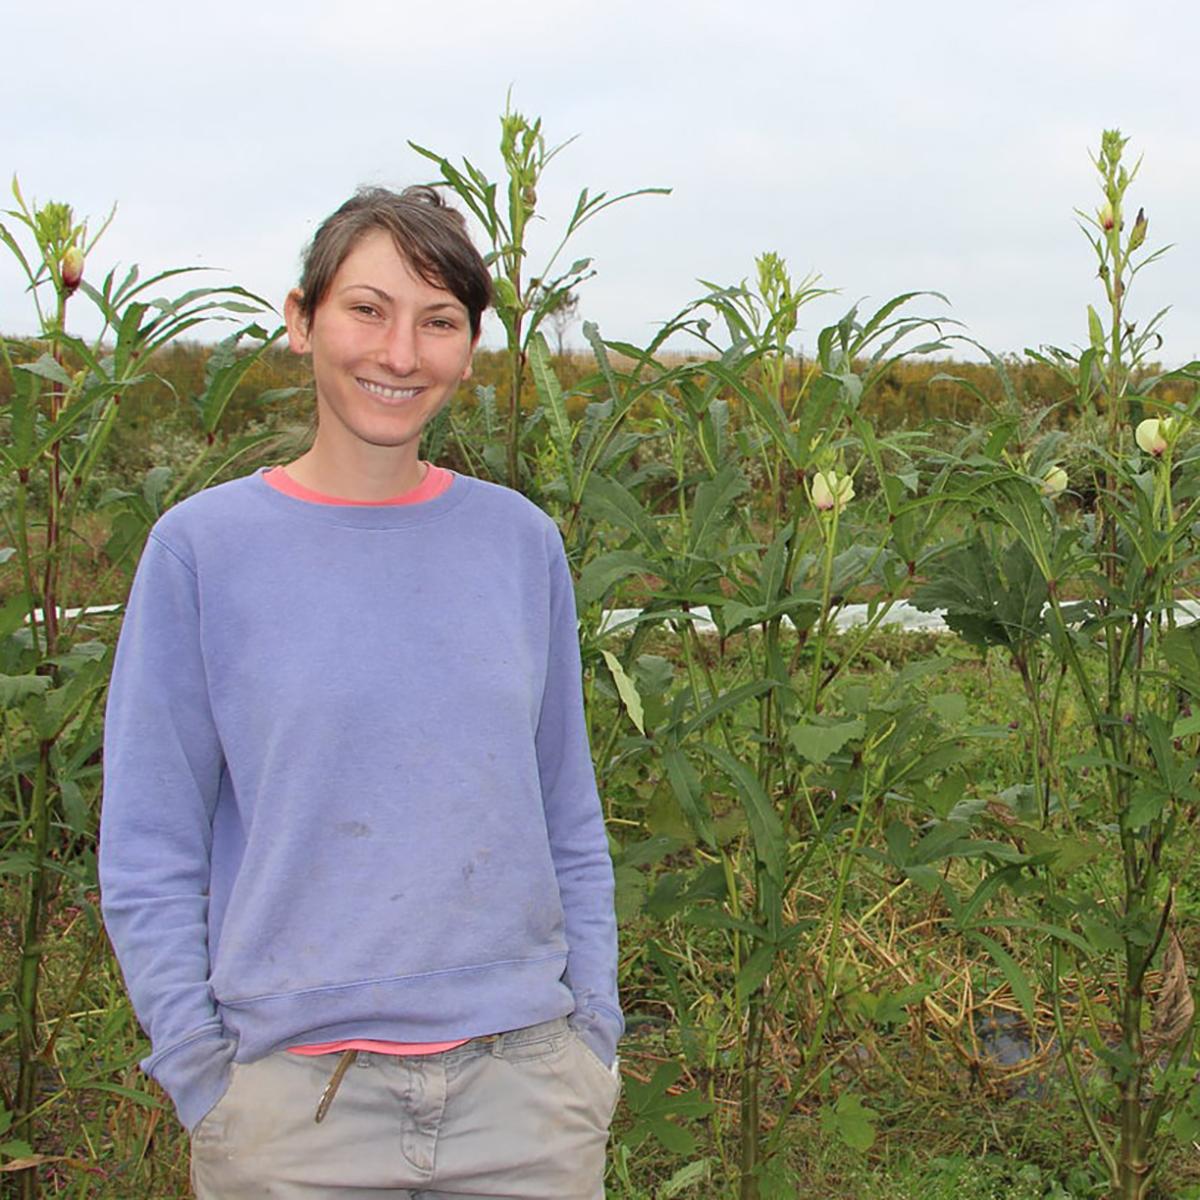 Photo of a woman standing in front of crops at Eden Hall Farm smiling.